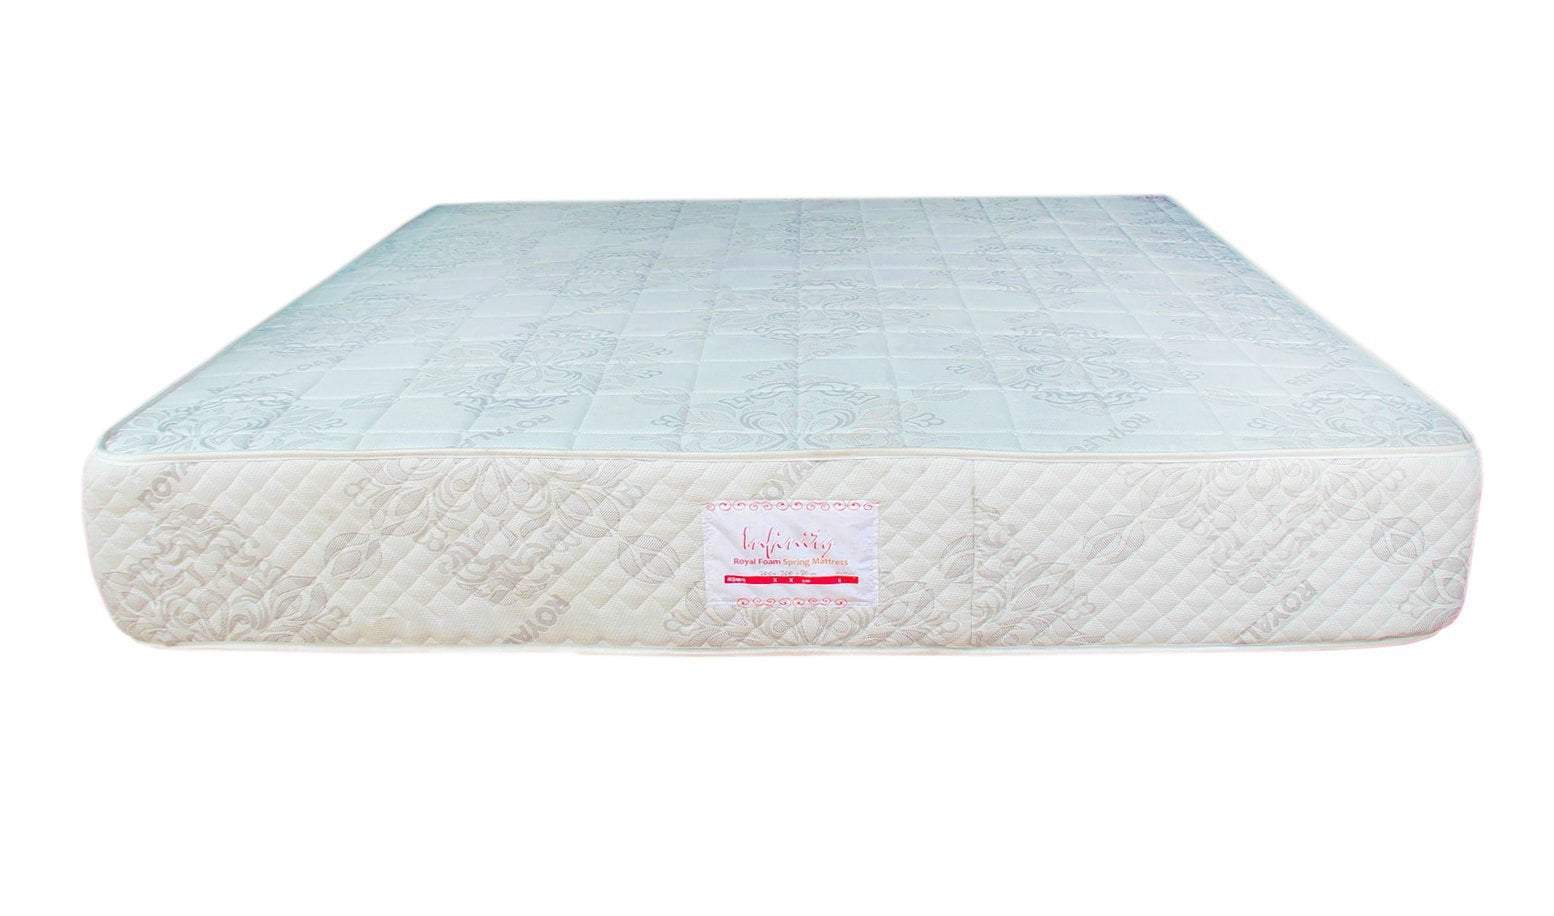 Royal Infinity Spring JACQUARD-Supersoft -Fully Quilted Mattress [75 x 84 x 12"] [6ft x 7ft x 12inches](Lagos Only)